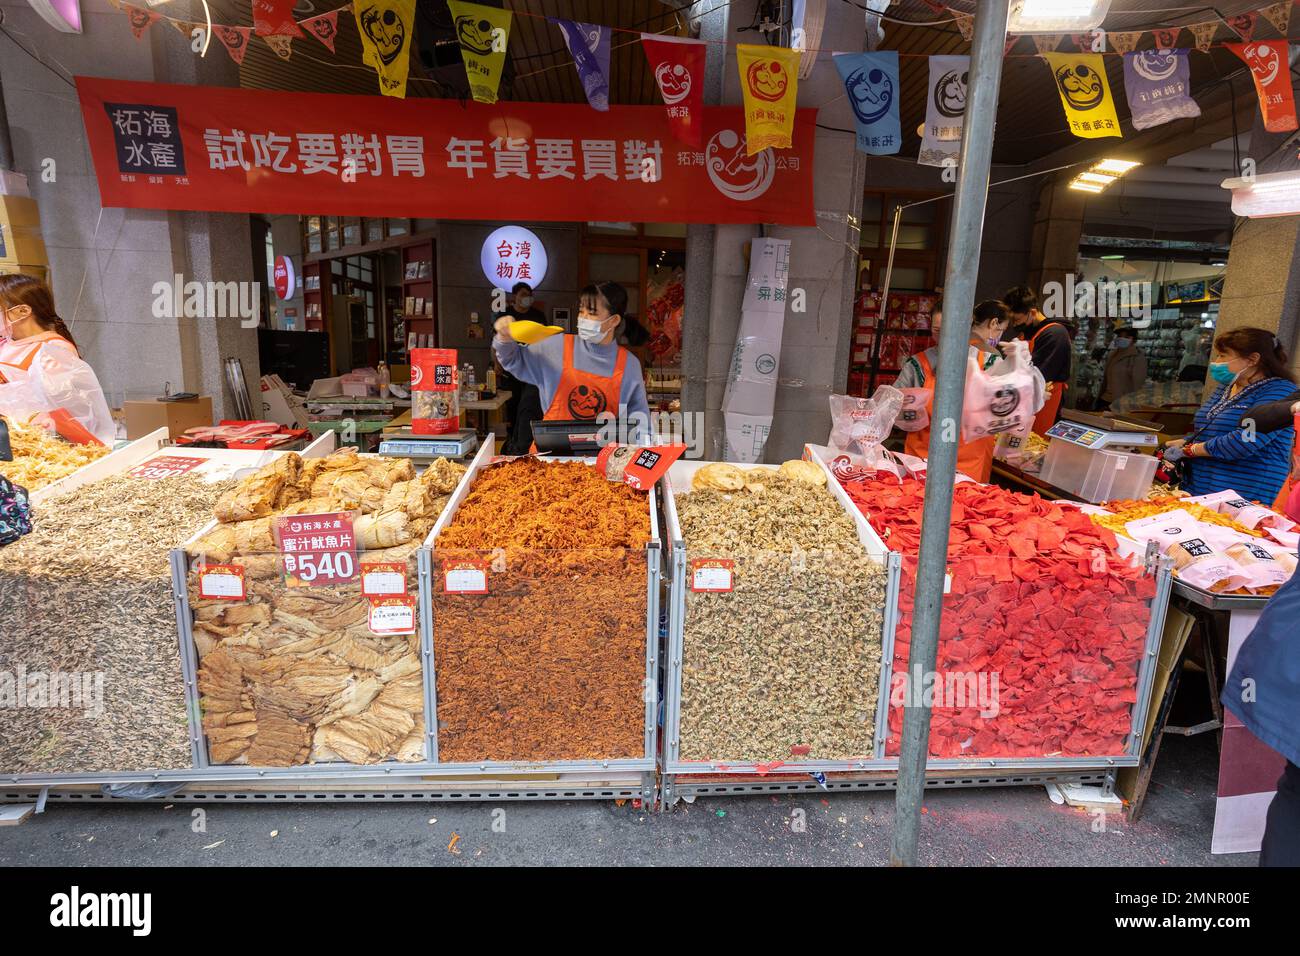 Stall at Dihua St New Year market in Taipei selling traditional snacks. Stock Photo